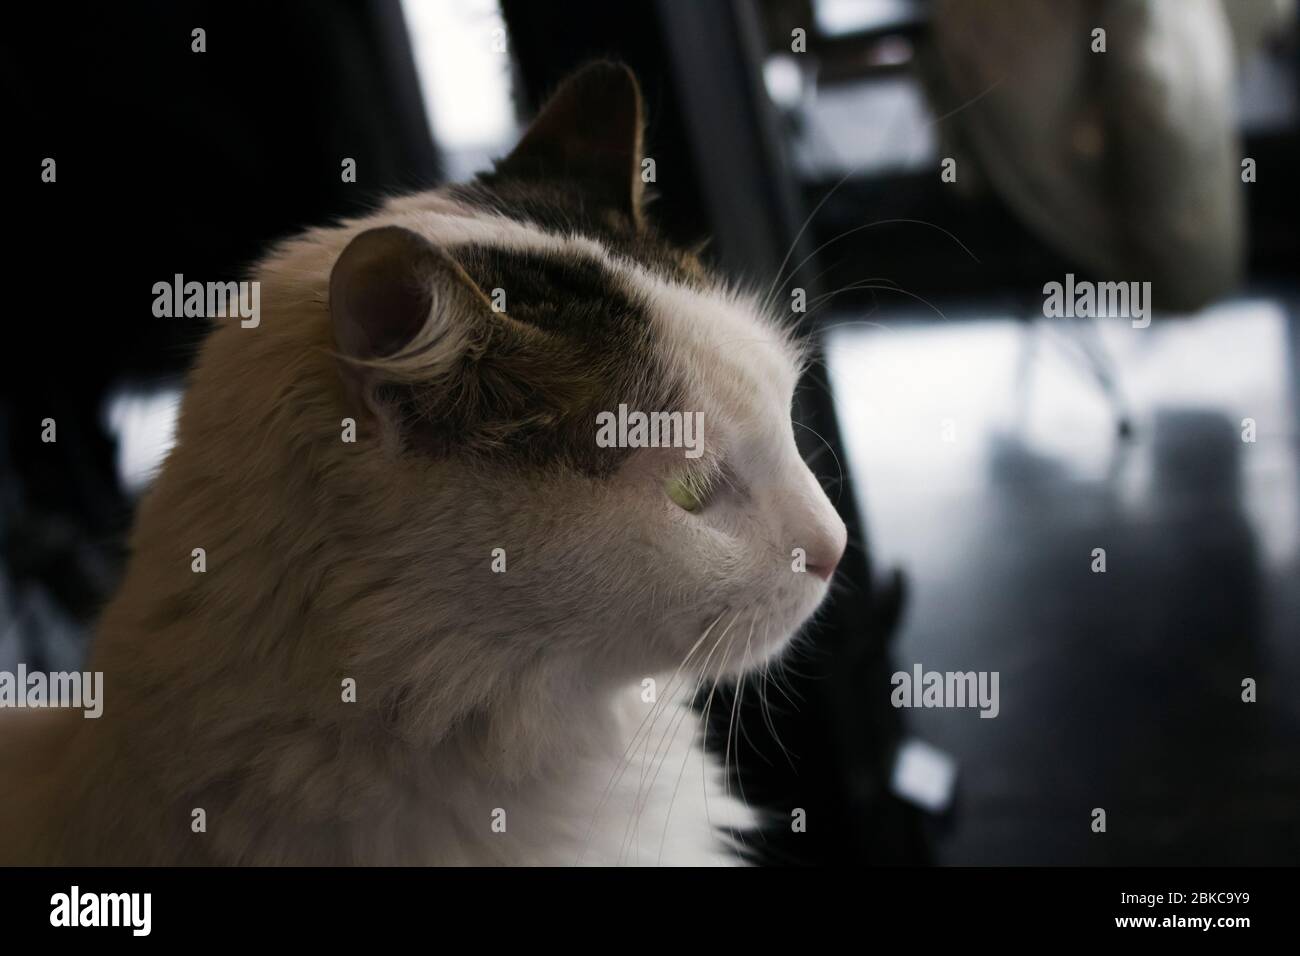 Profile portrait of a white-brown cat staring at right. Interior shot, ambient light conditions. Stock Photo